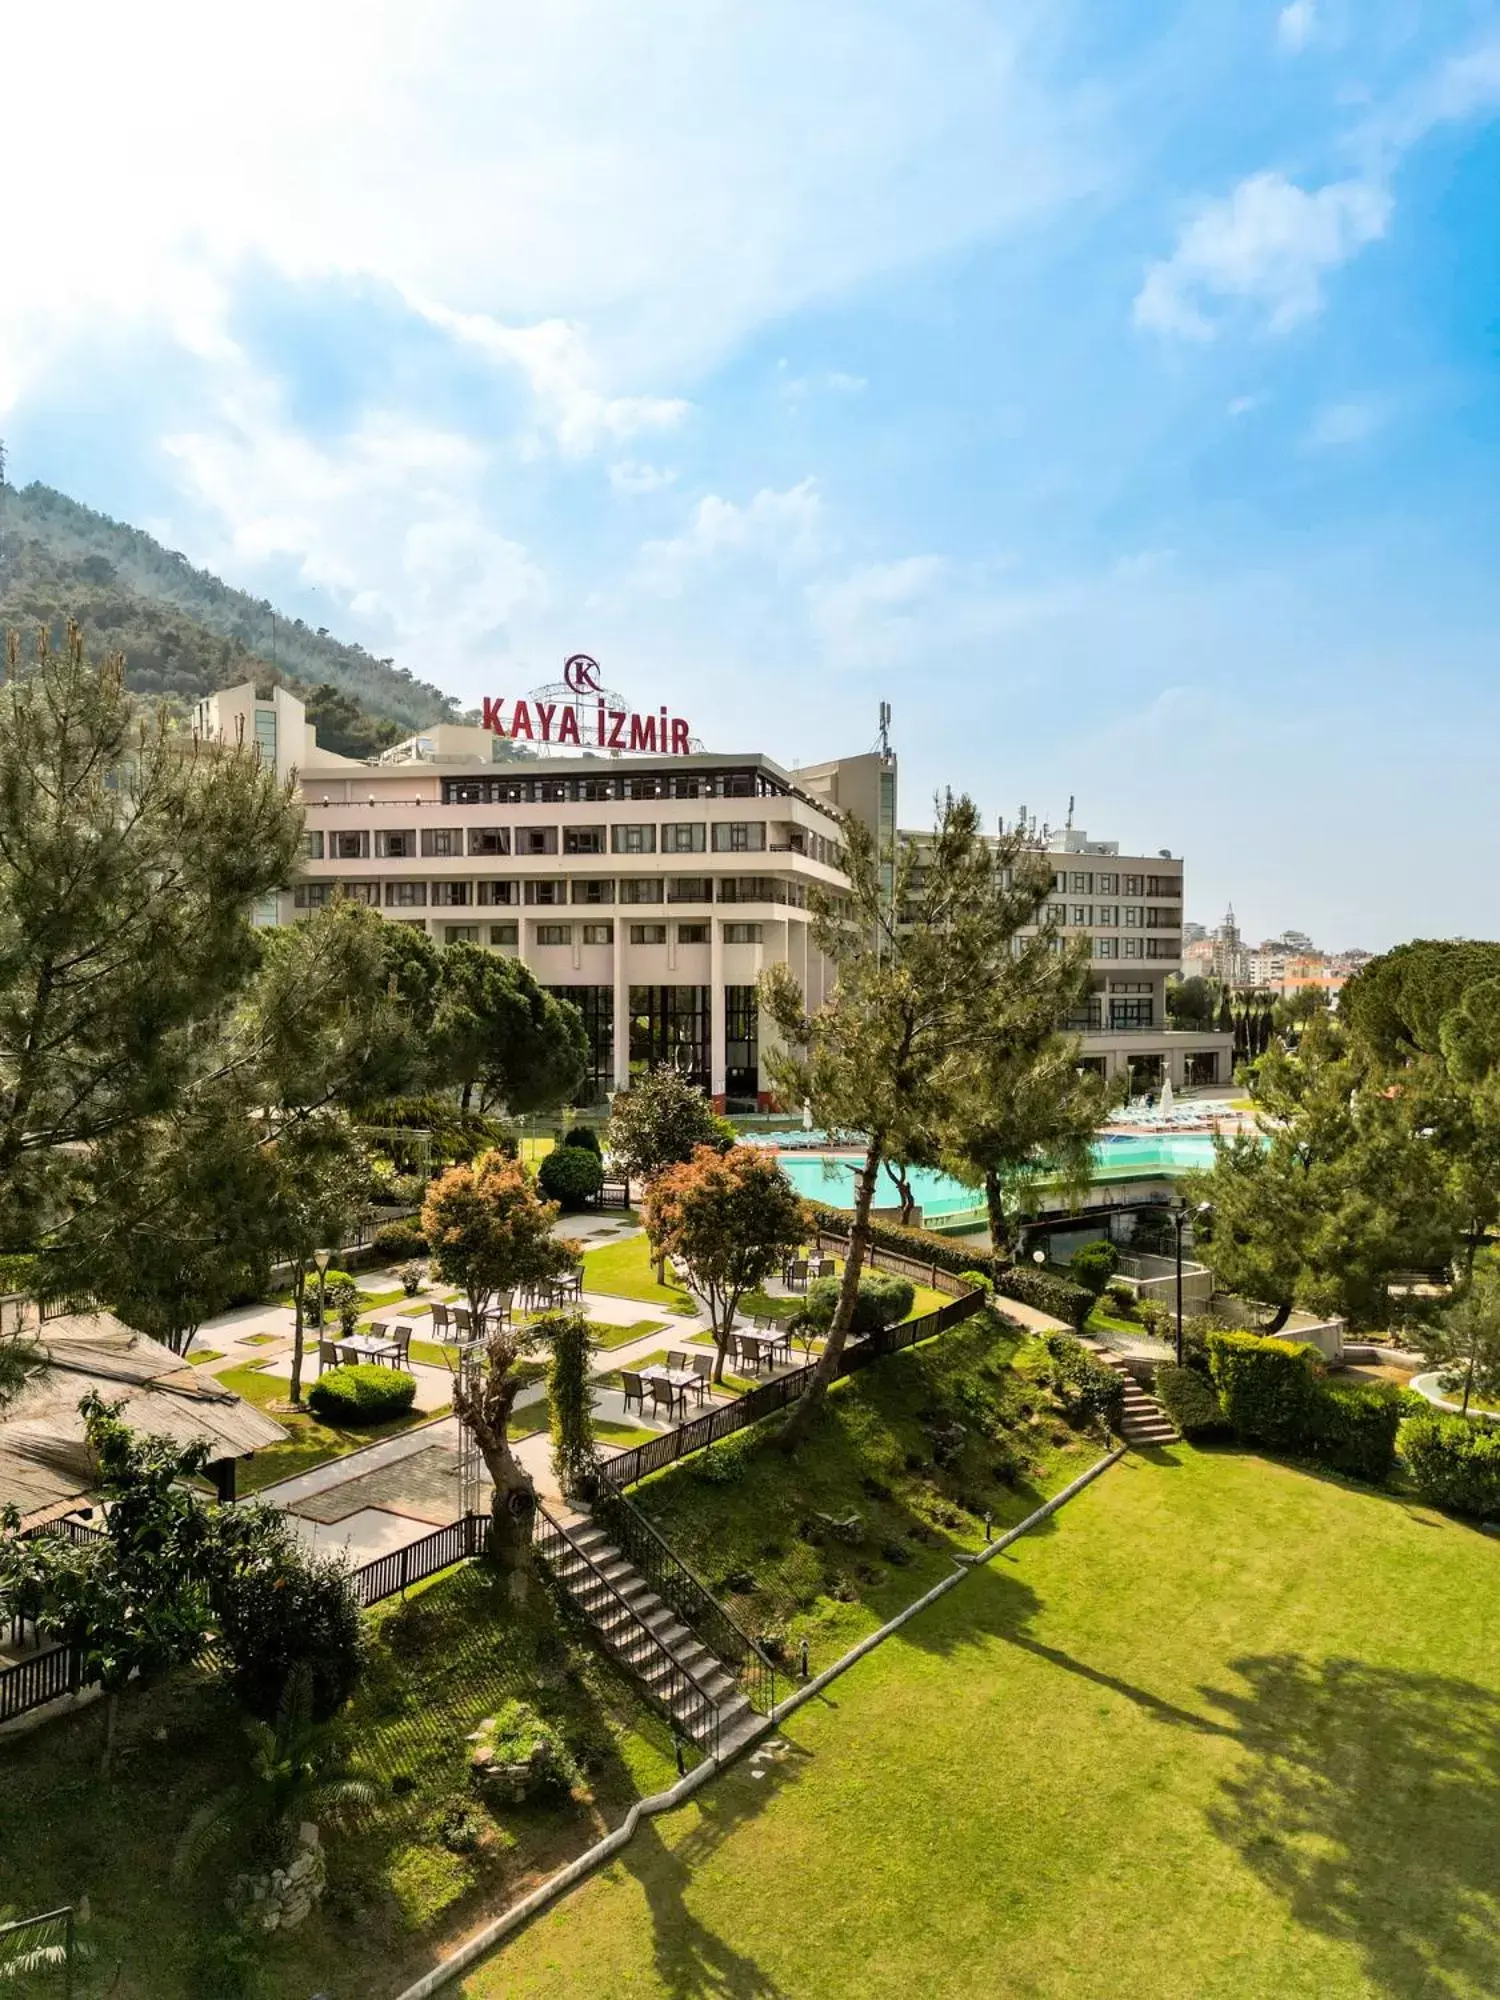 Off site, Property Building in Kaya Izmir Thermal & Convention